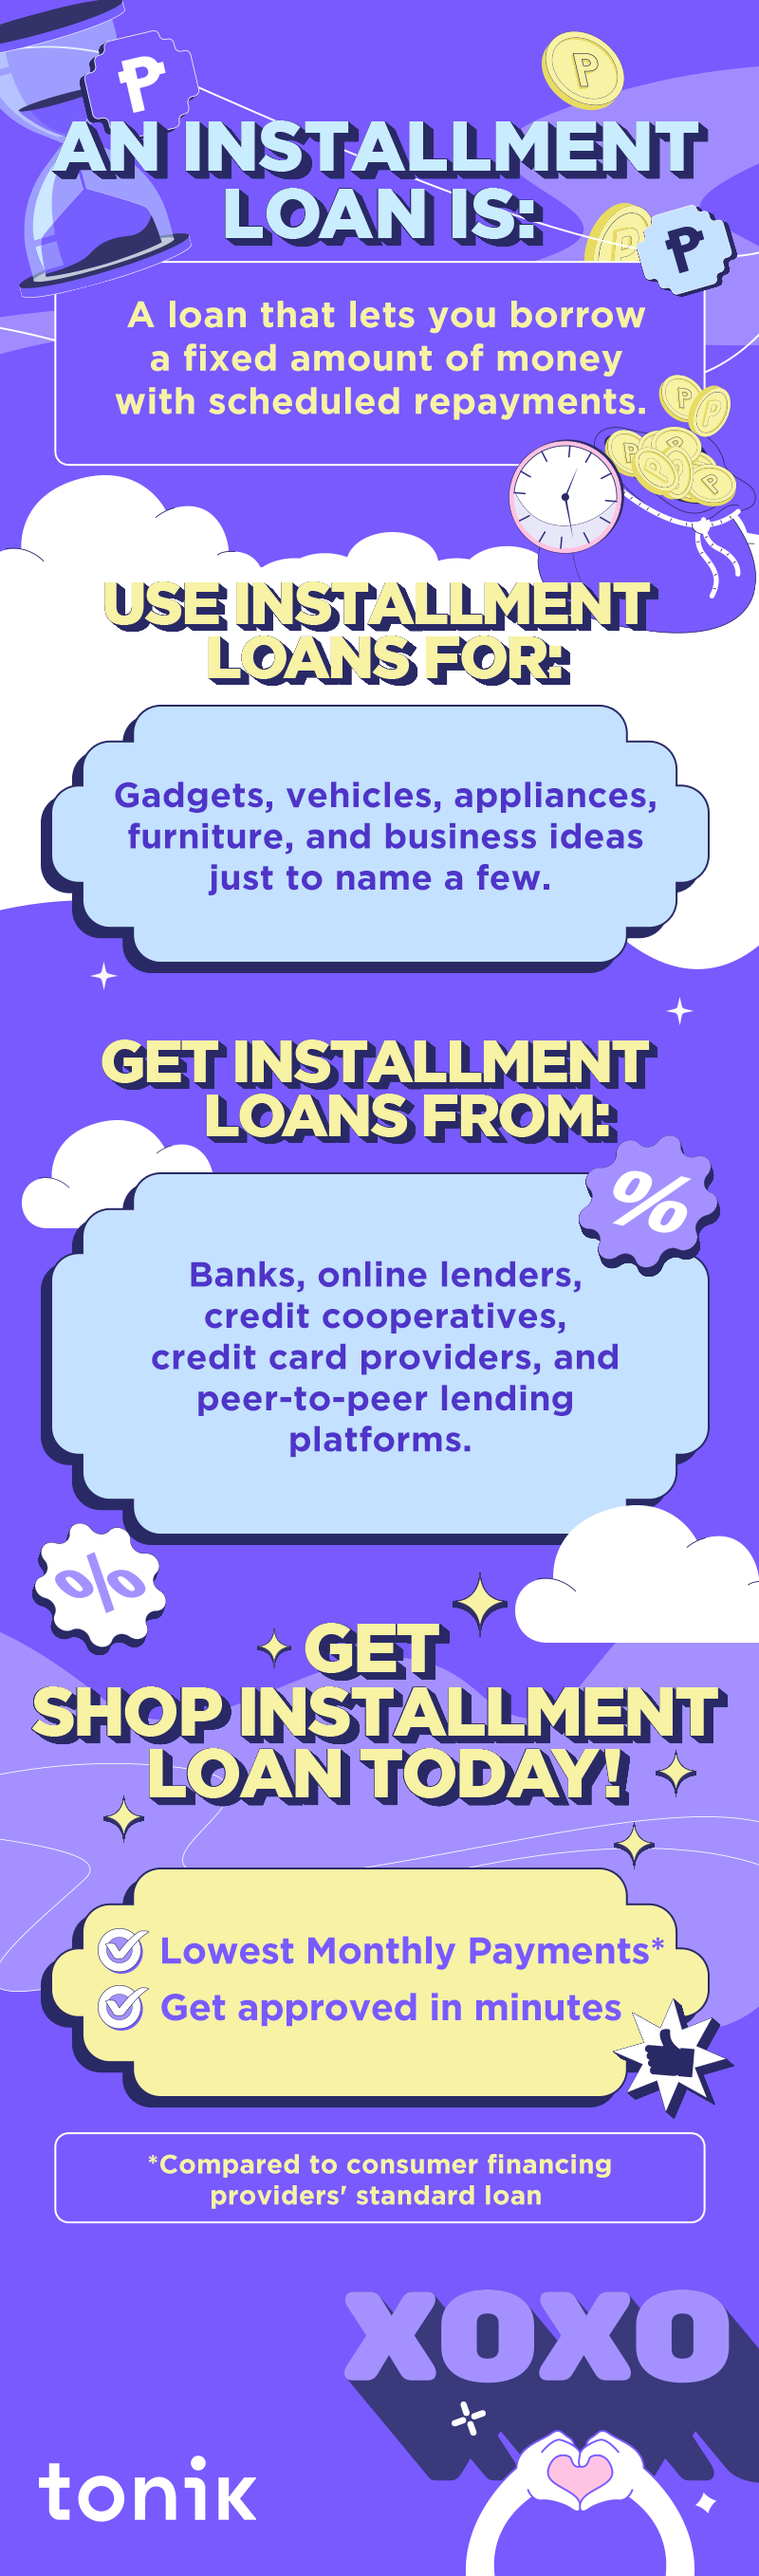 Infographic about installment loans